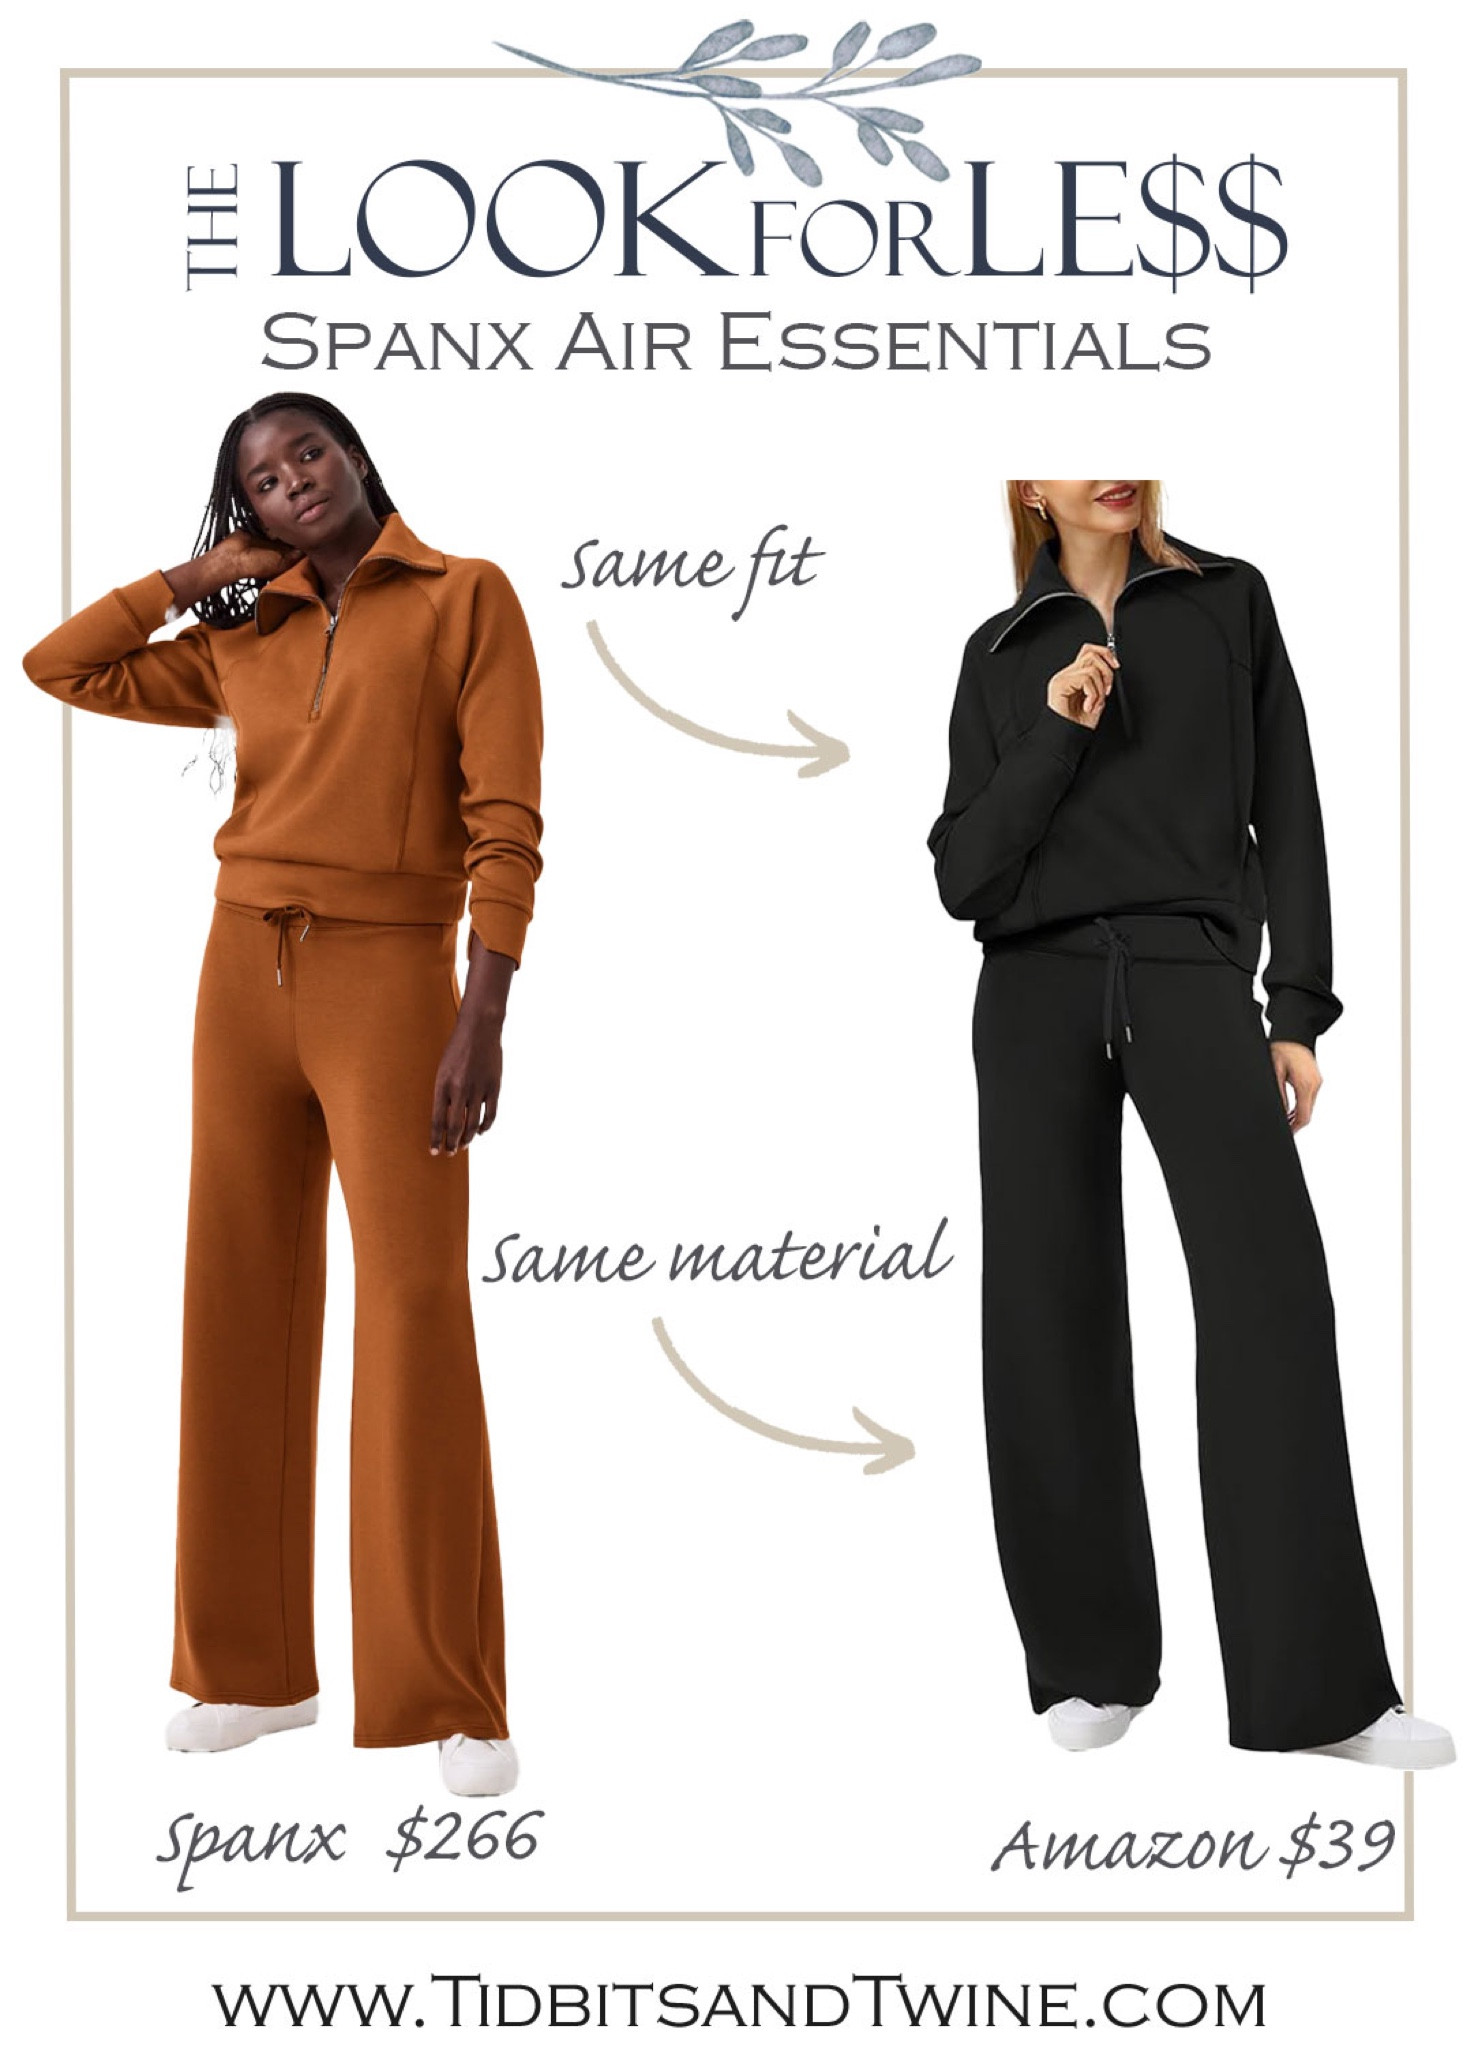 SPANX AirEssentials lookalike 🥰 comment LINK to have links and sizing  details sent to your message. You can also find them in my bio!!